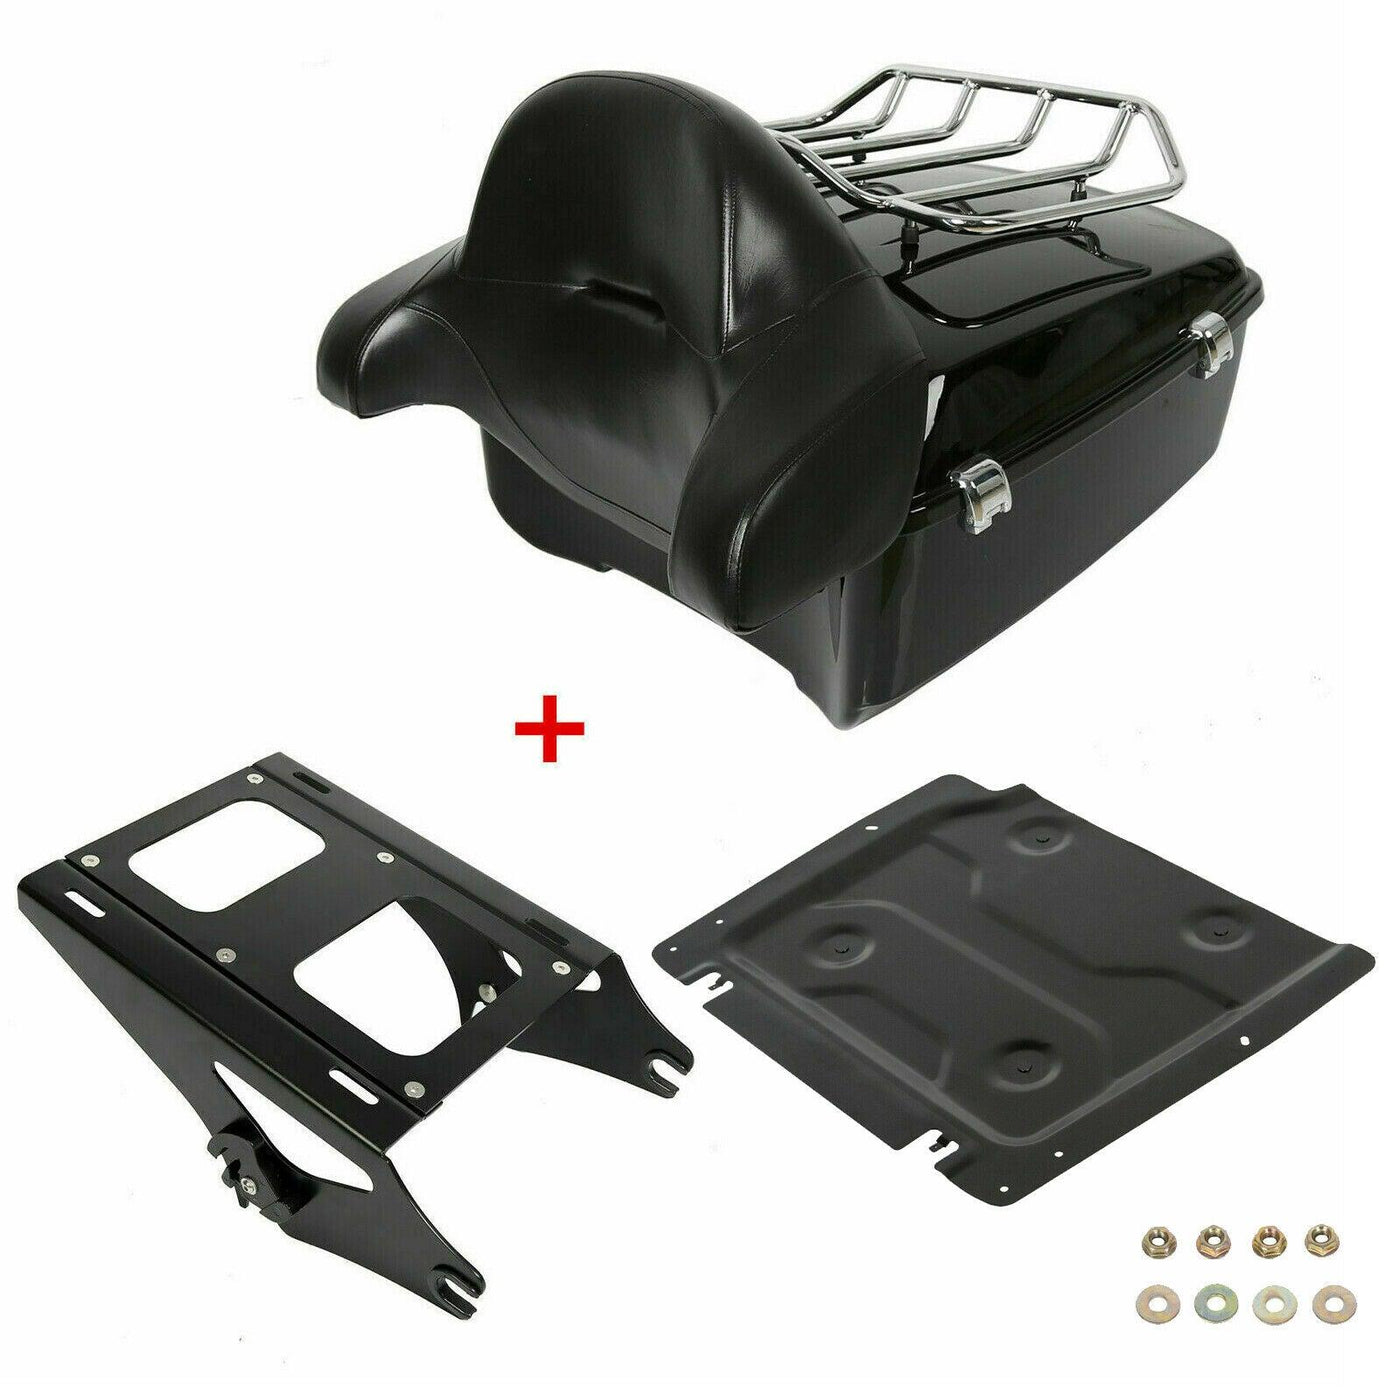 King Tour Pack Trunk W/ Mount Rack +Base Plate For Harley Davidson 14-21 Touring - Moto Life Products